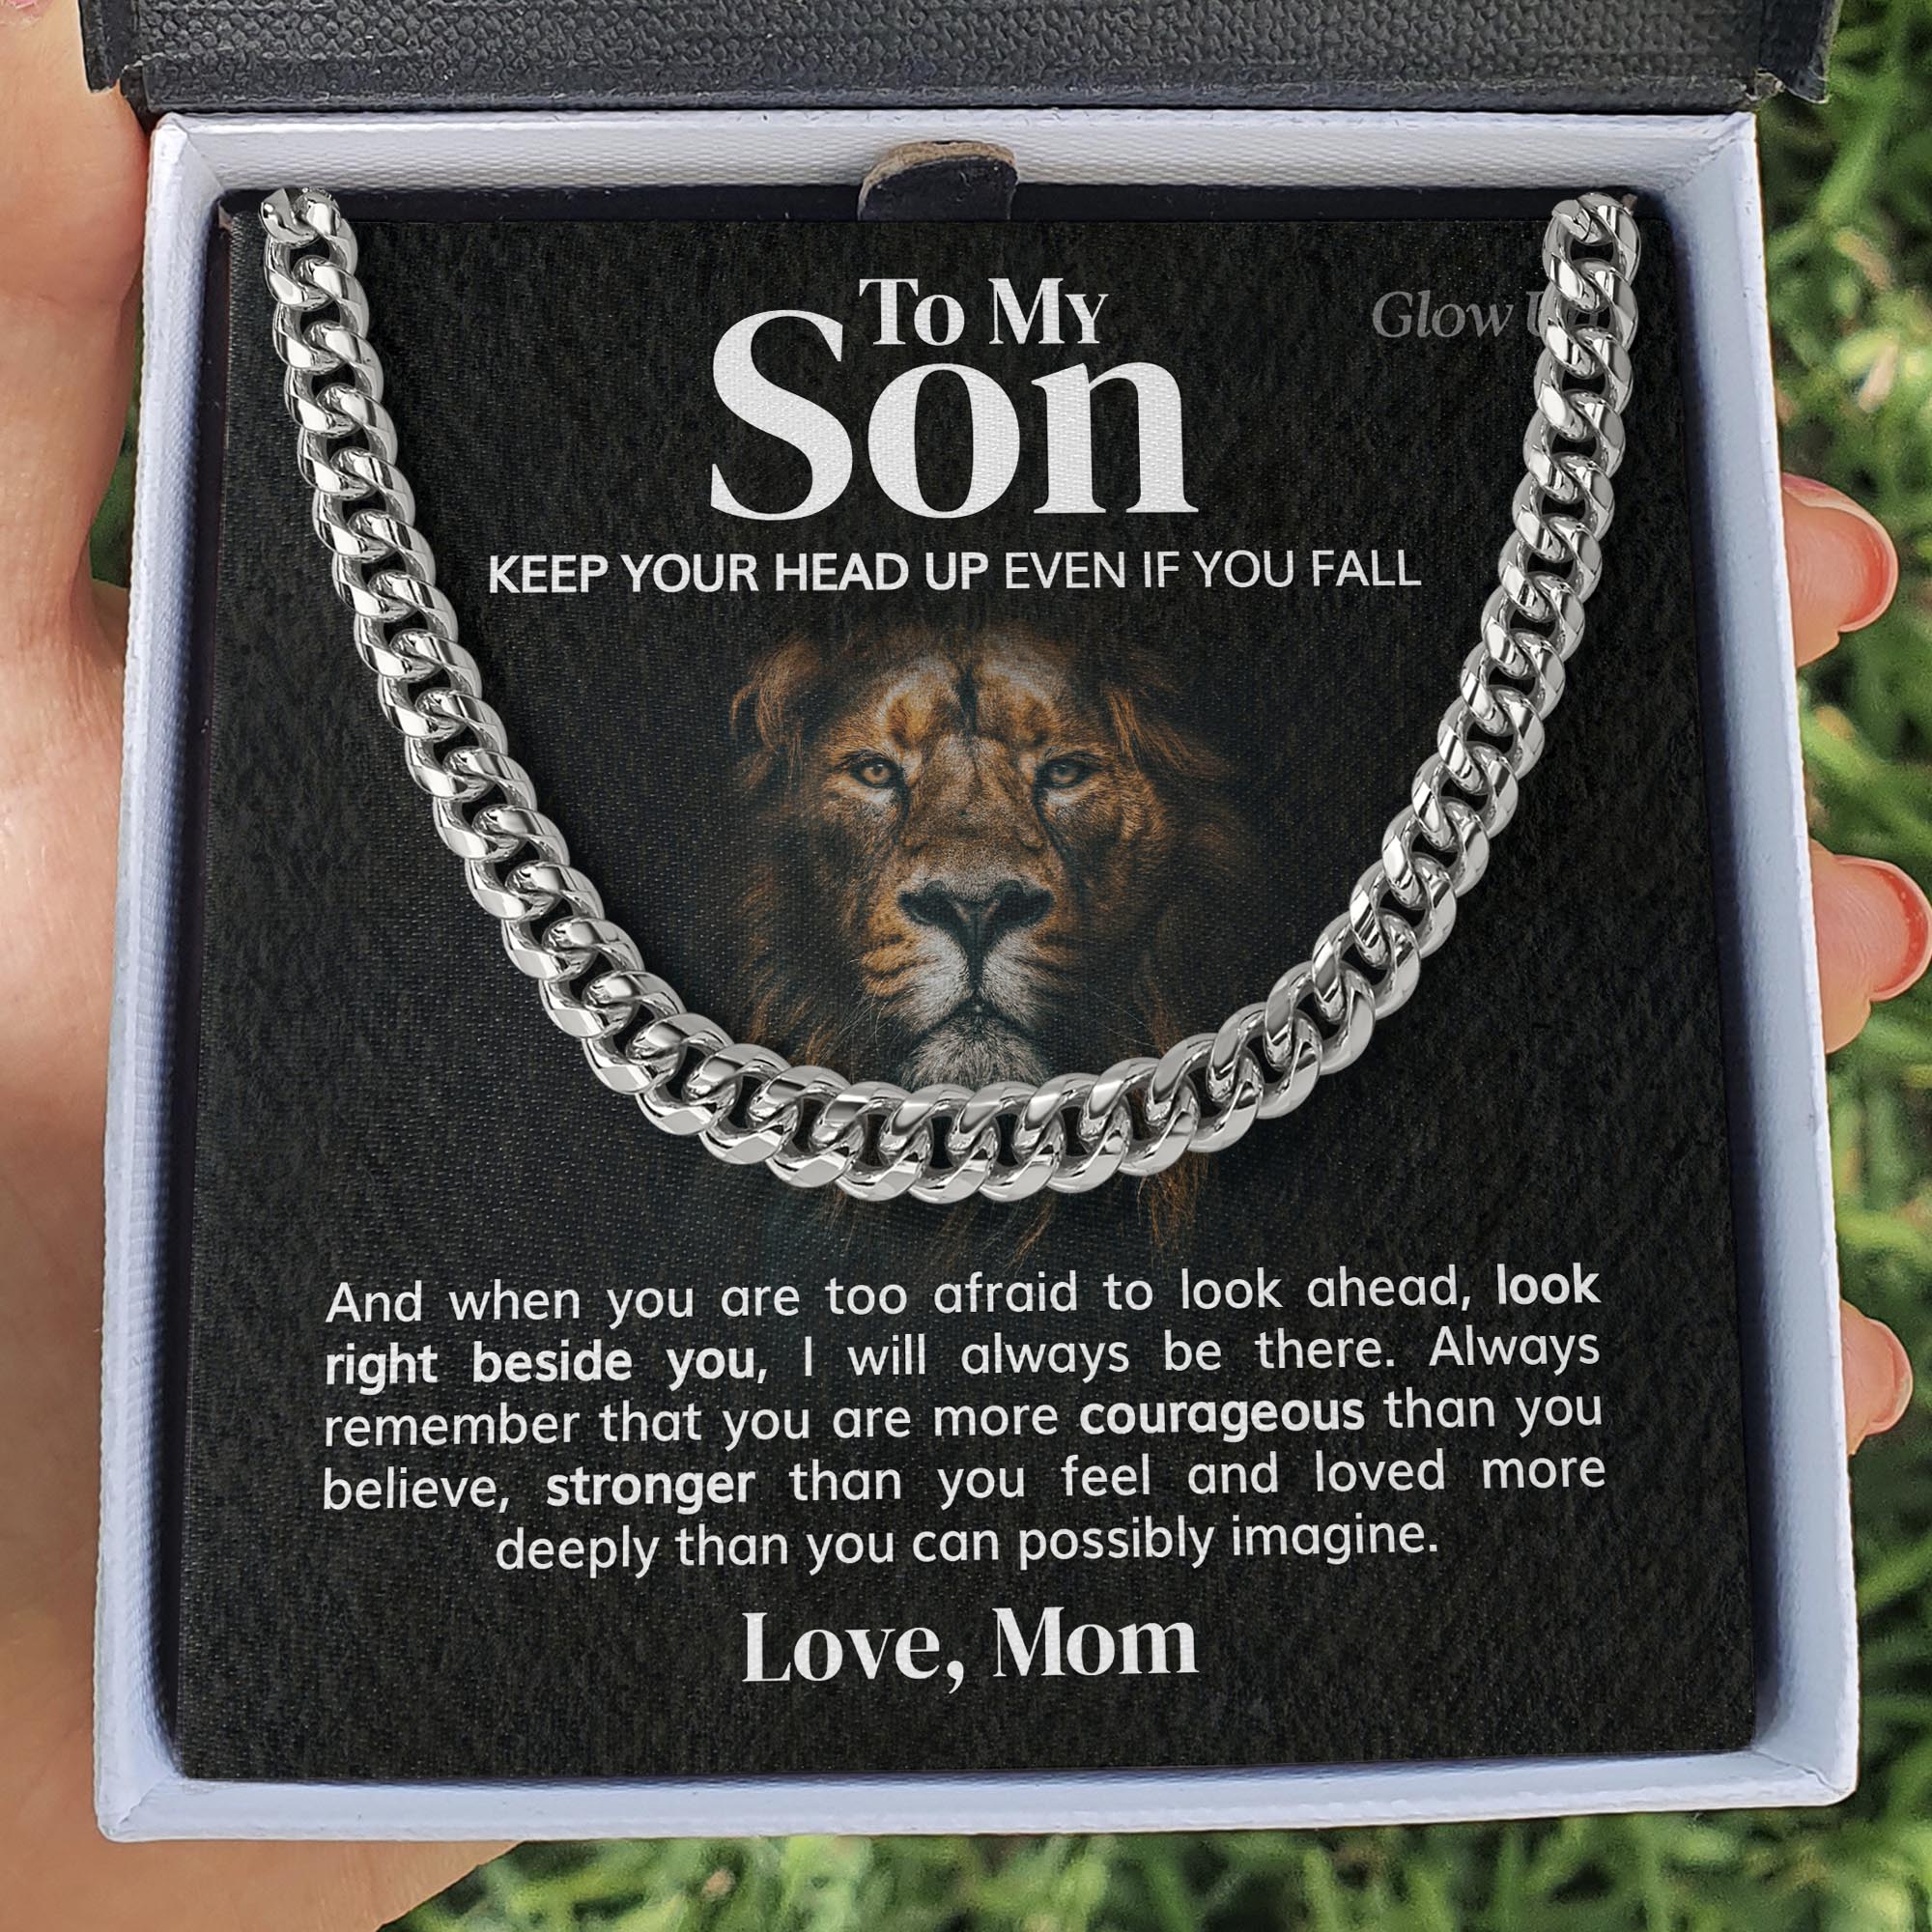 GlowUp 316L Stainless Steel / Two-Toned Box To my Son from Mom - Keep your head up - Cuban Link Chain